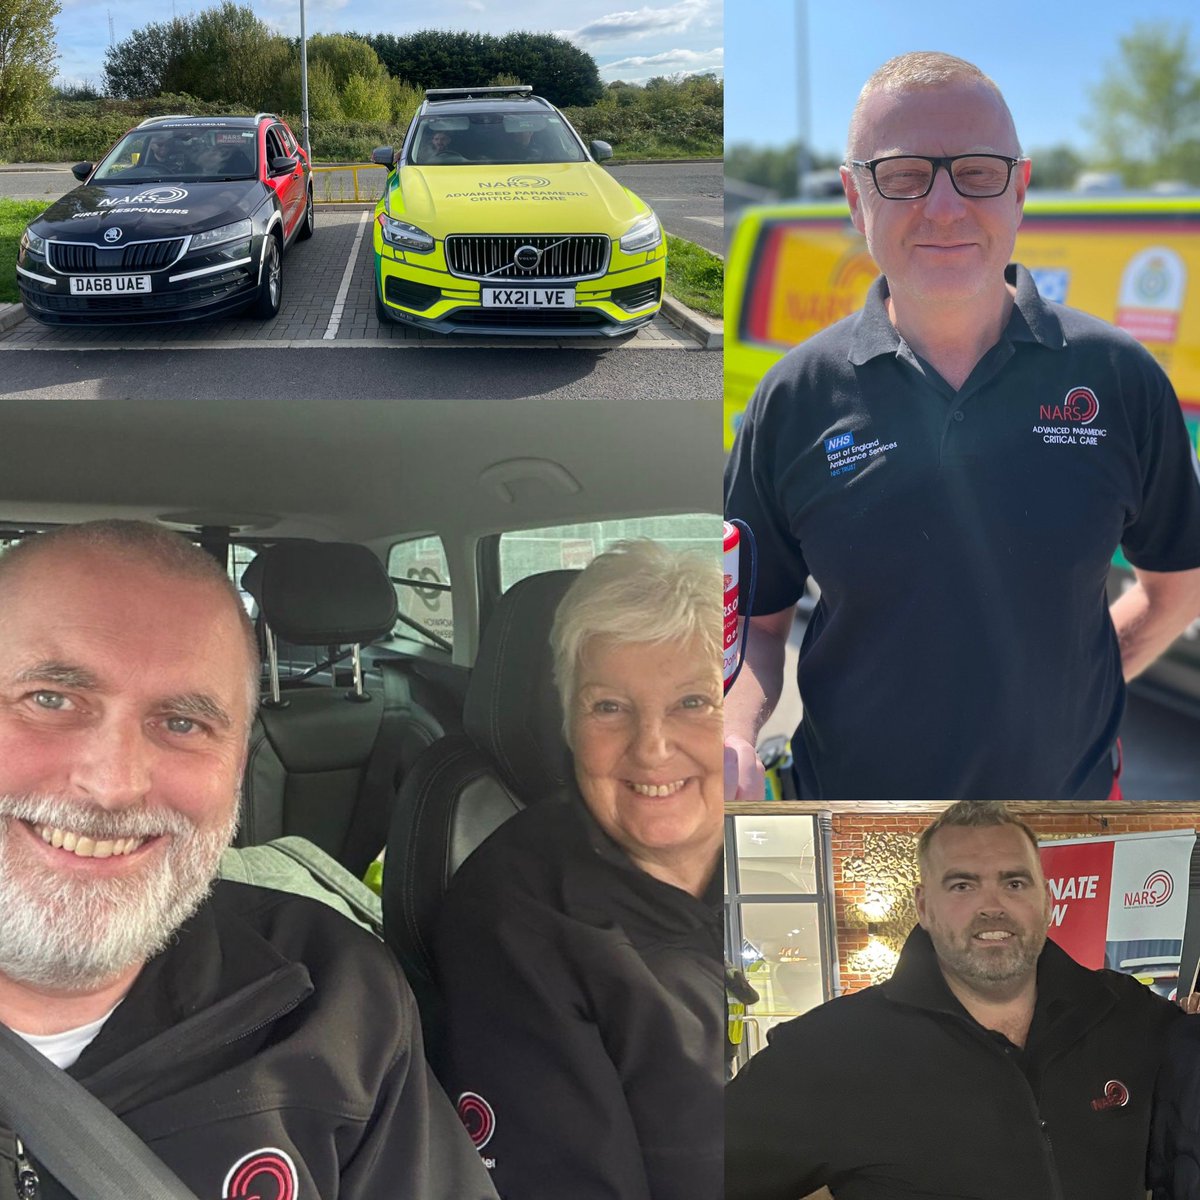 The weekend has arrived and so had the nice weather finally! NARS First Responder Steve M covered overnight being tasked to two calls and now handing over to First Responders Steve W & Pat. Also NARS Critical Care Paramedic Carl is providing enhanced care today. #TeamNARS